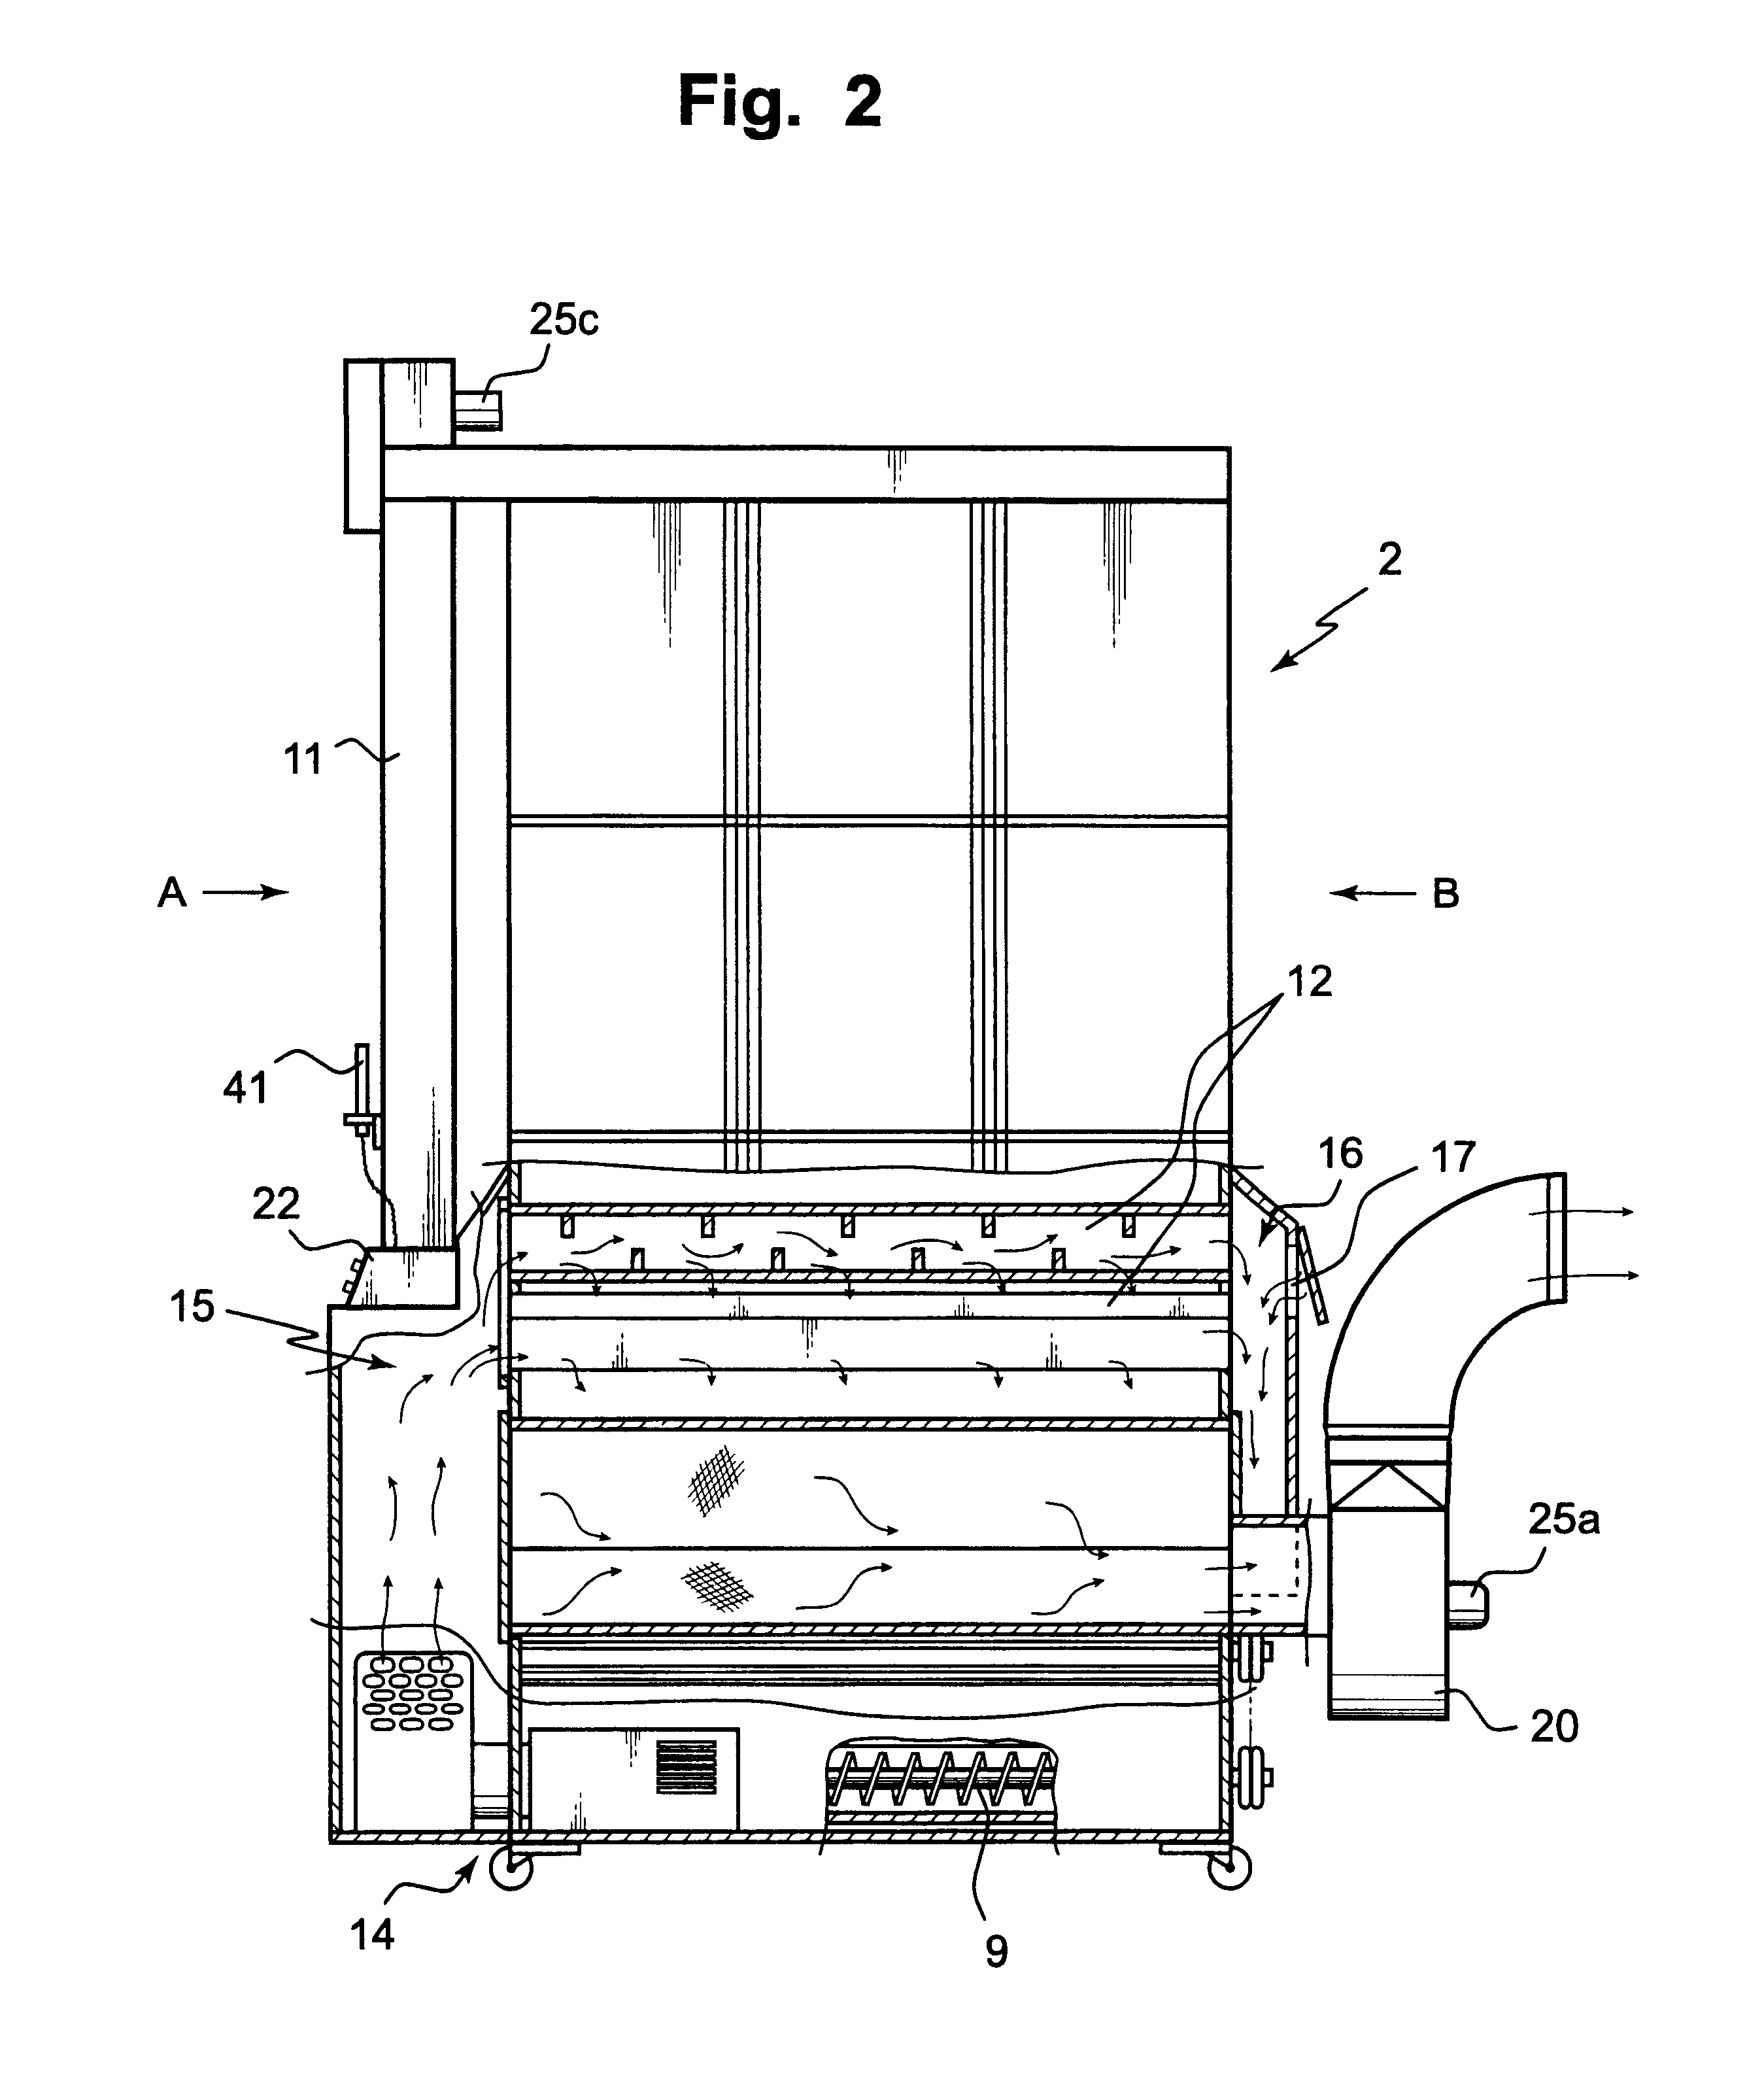 Apparatus for drying granular objects involving pre-heating process